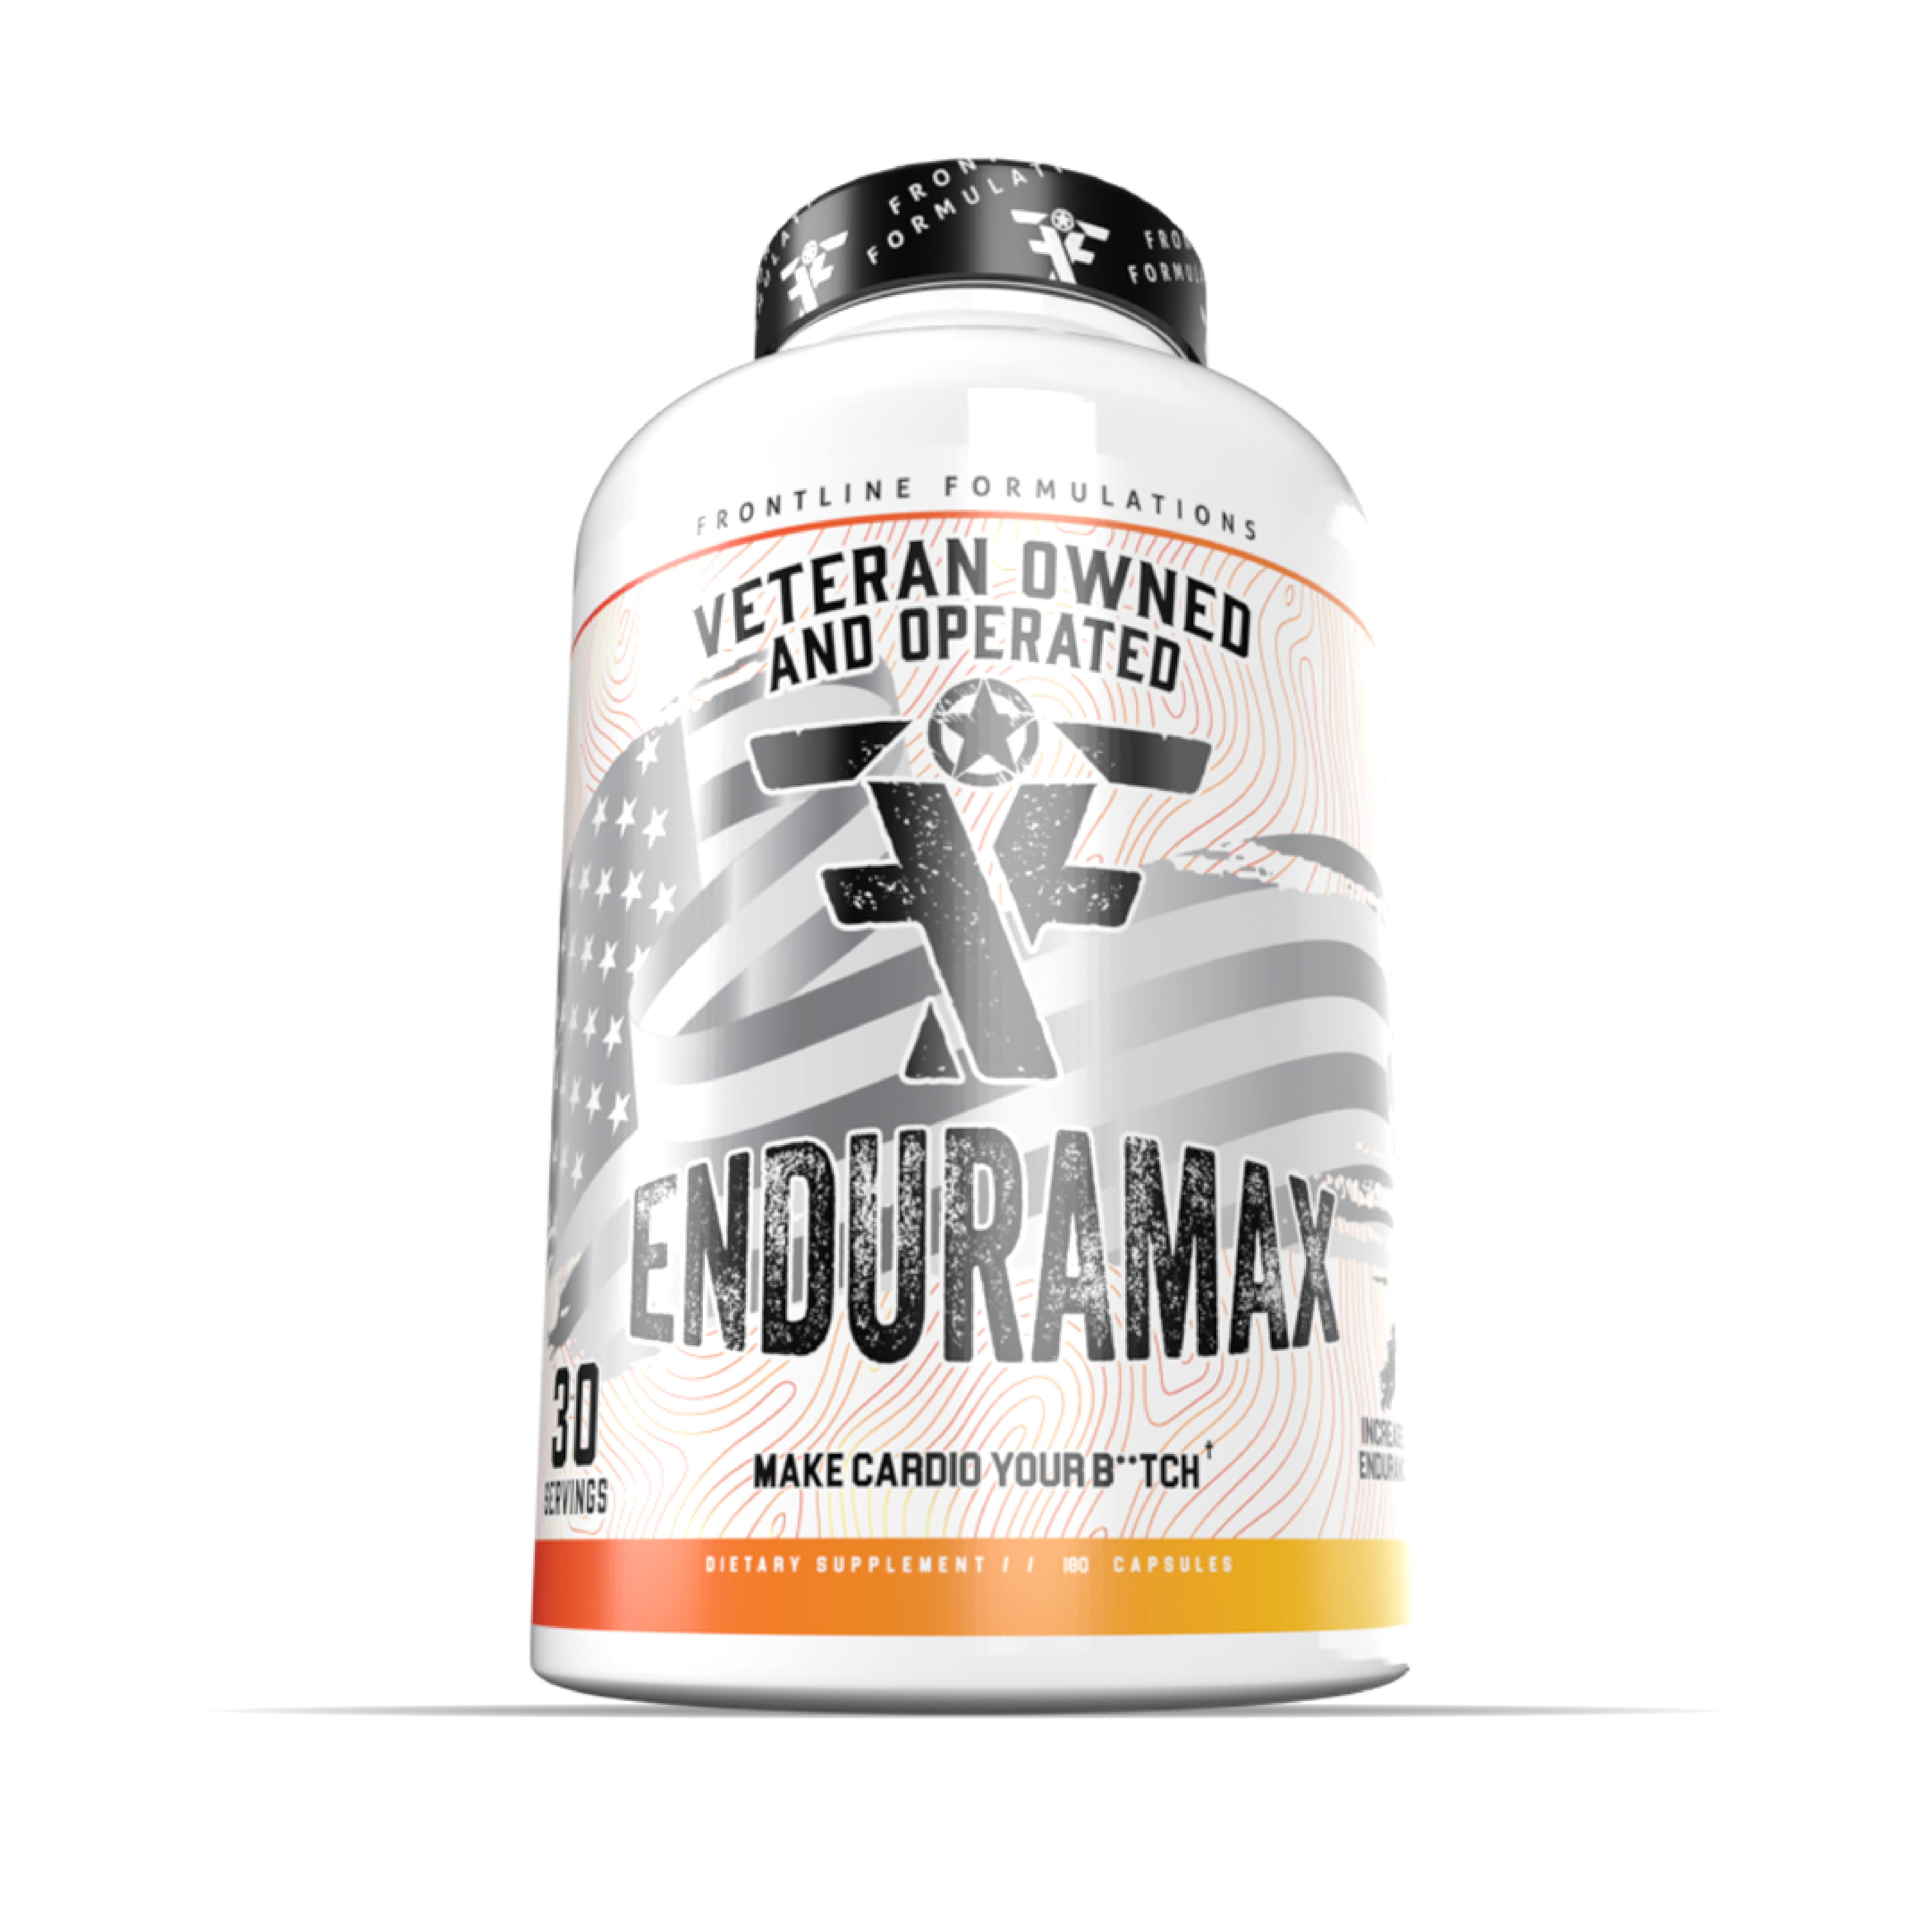 Enduramax Clinically proven to: Reduce Lactic Acid by 26% - Less Muscle Soreness Reduce Oxidative Stress by 39% - Fights Free Radical Damage Reduce Creatine Kinase by 6X - Faster Recovery The Benefits: 26% Reduction of Lactic Acid -> Less Muscle Soreness